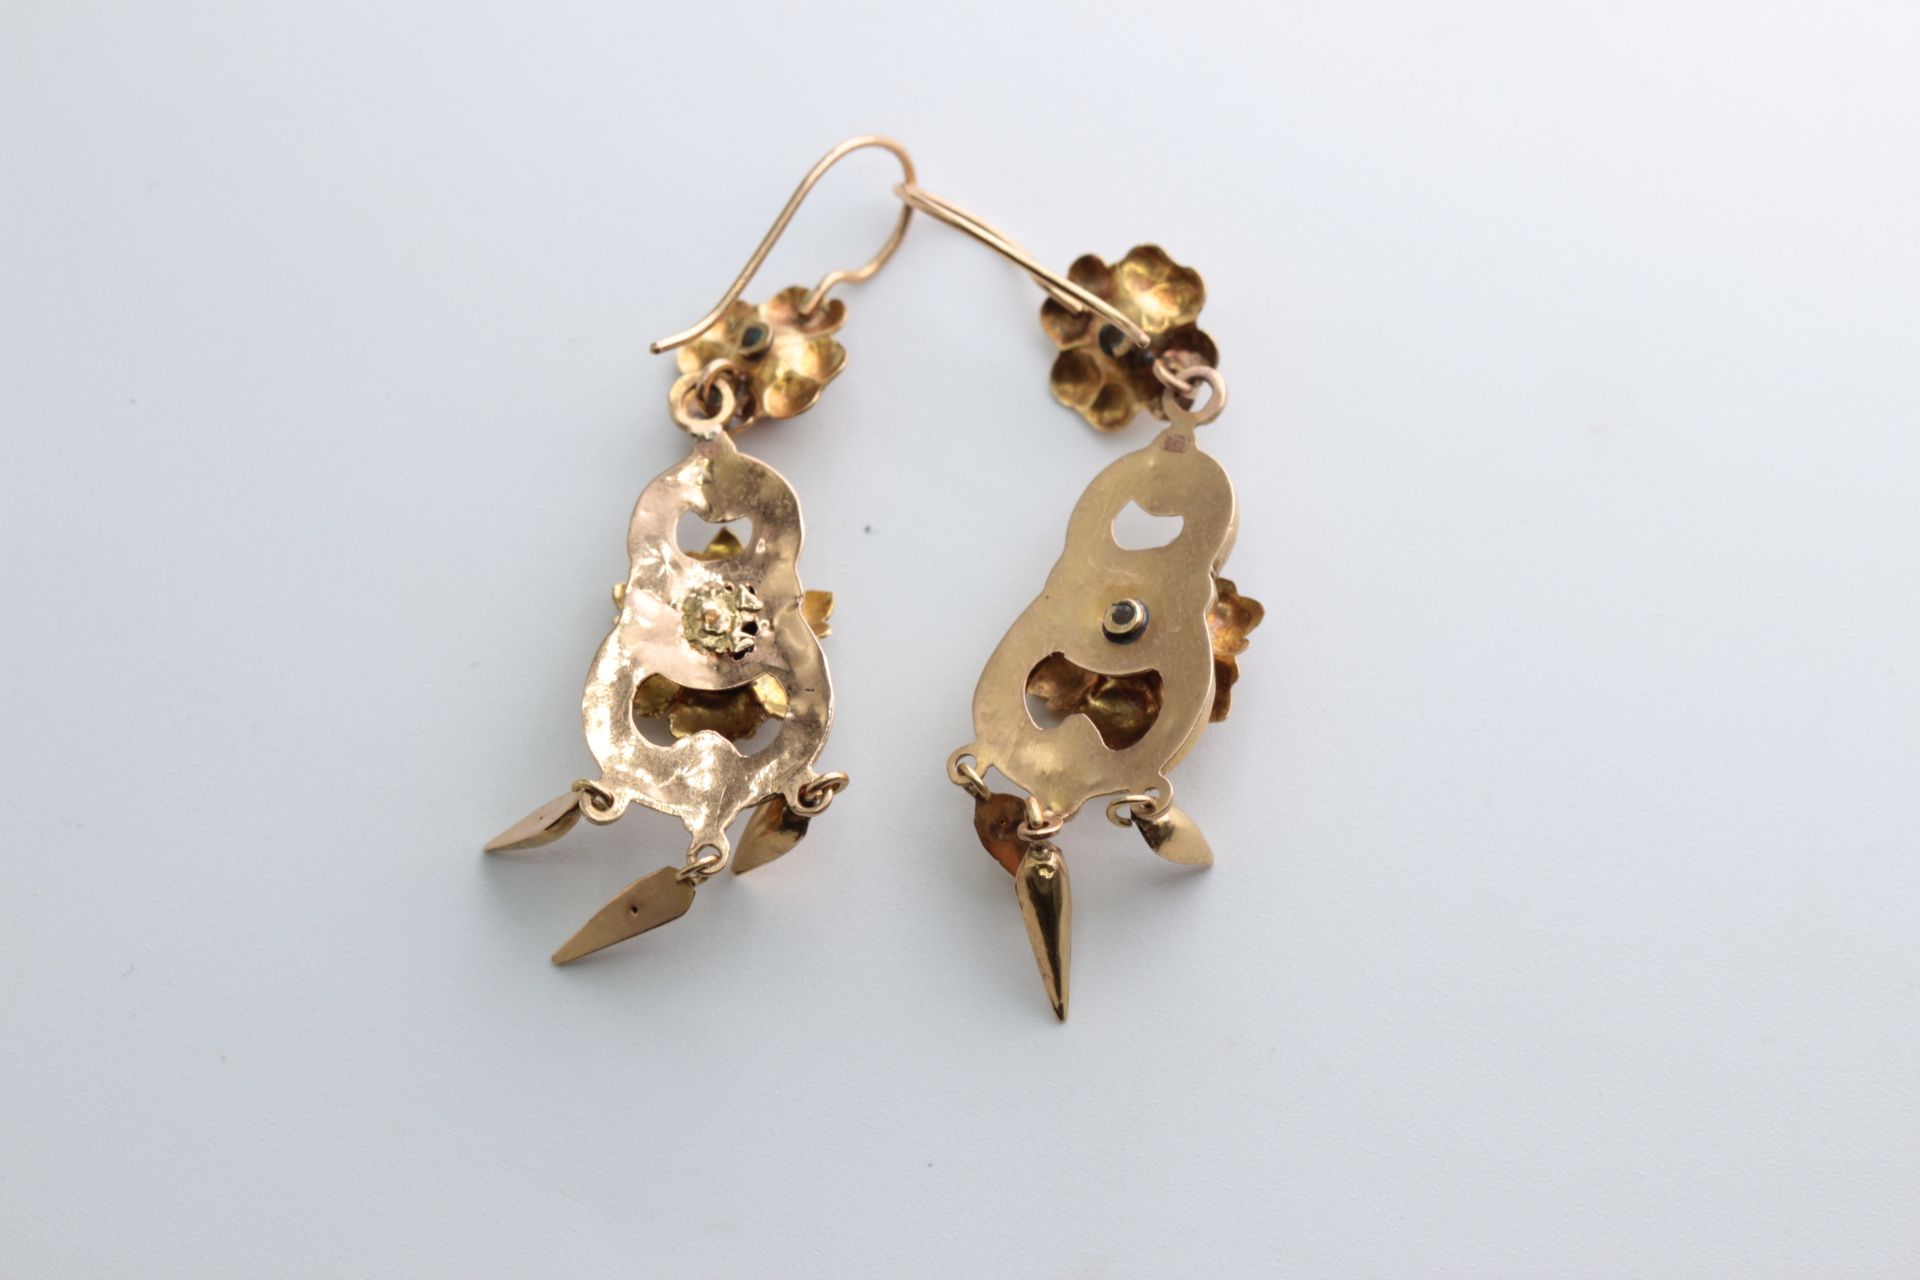 Antique Earrings with Rubies. 14K Yellow Gold - Image 3 of 4